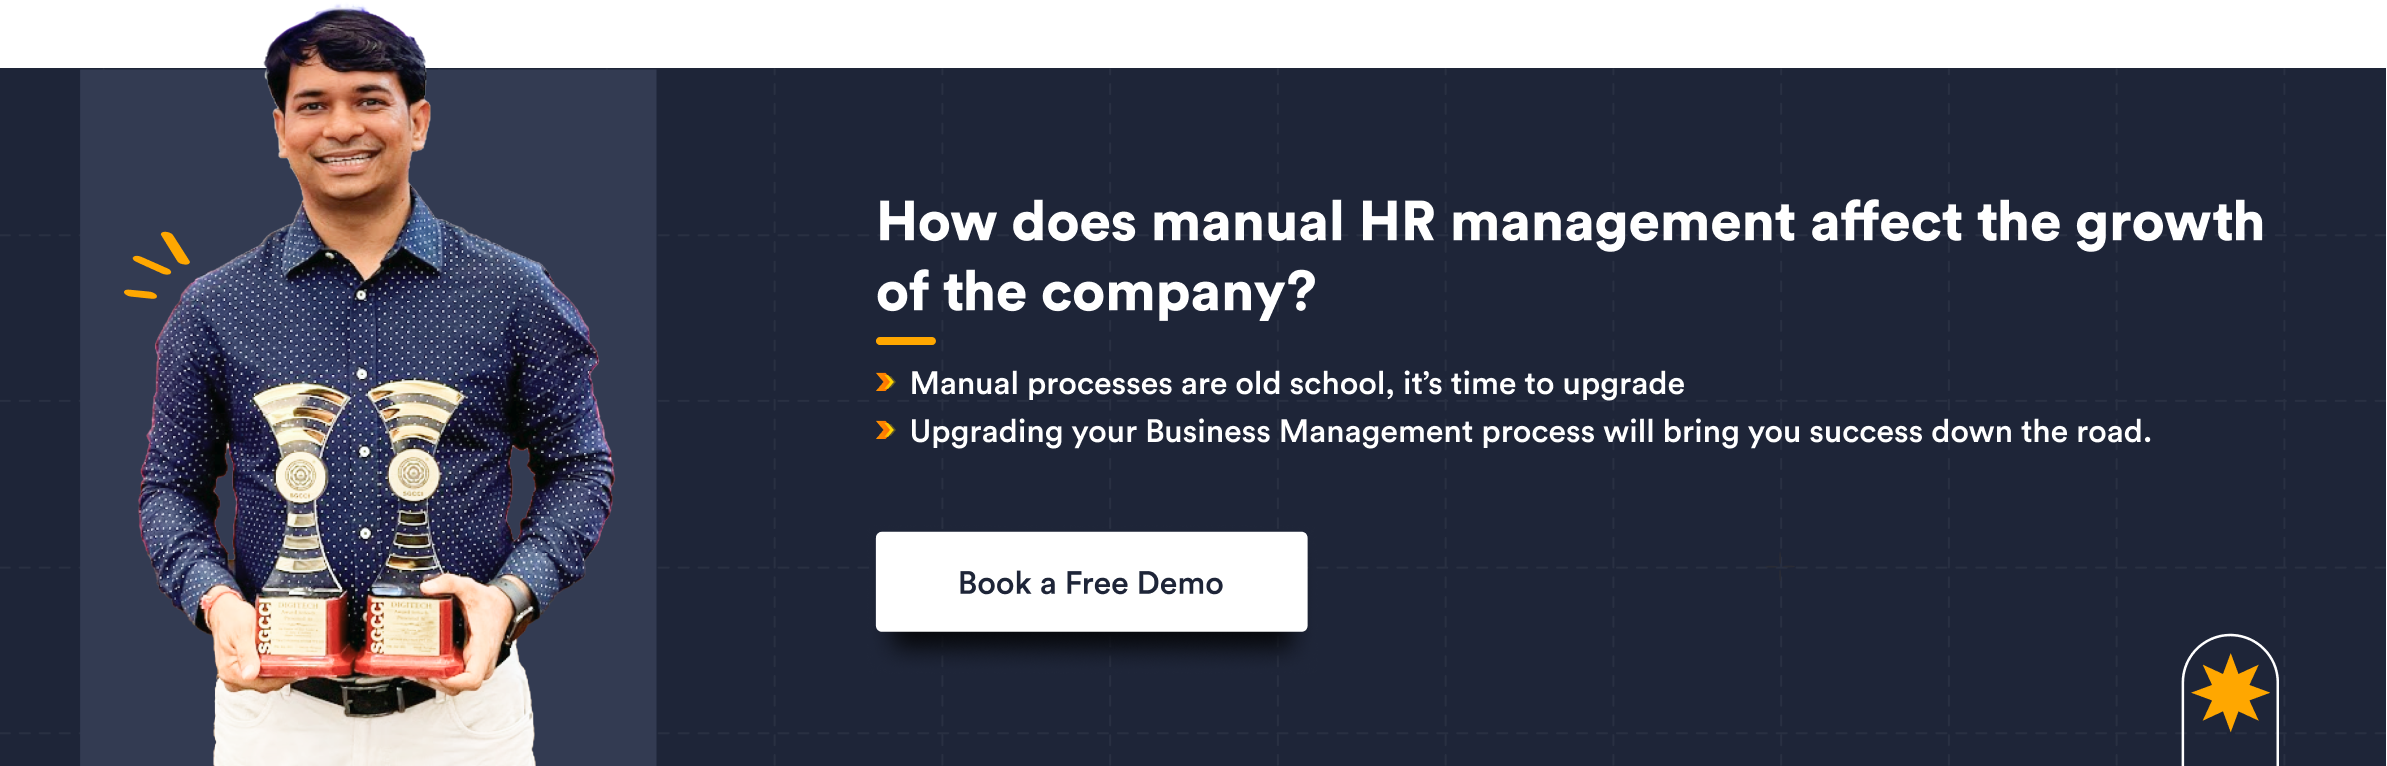 How does manual HR management affect the growth of the company